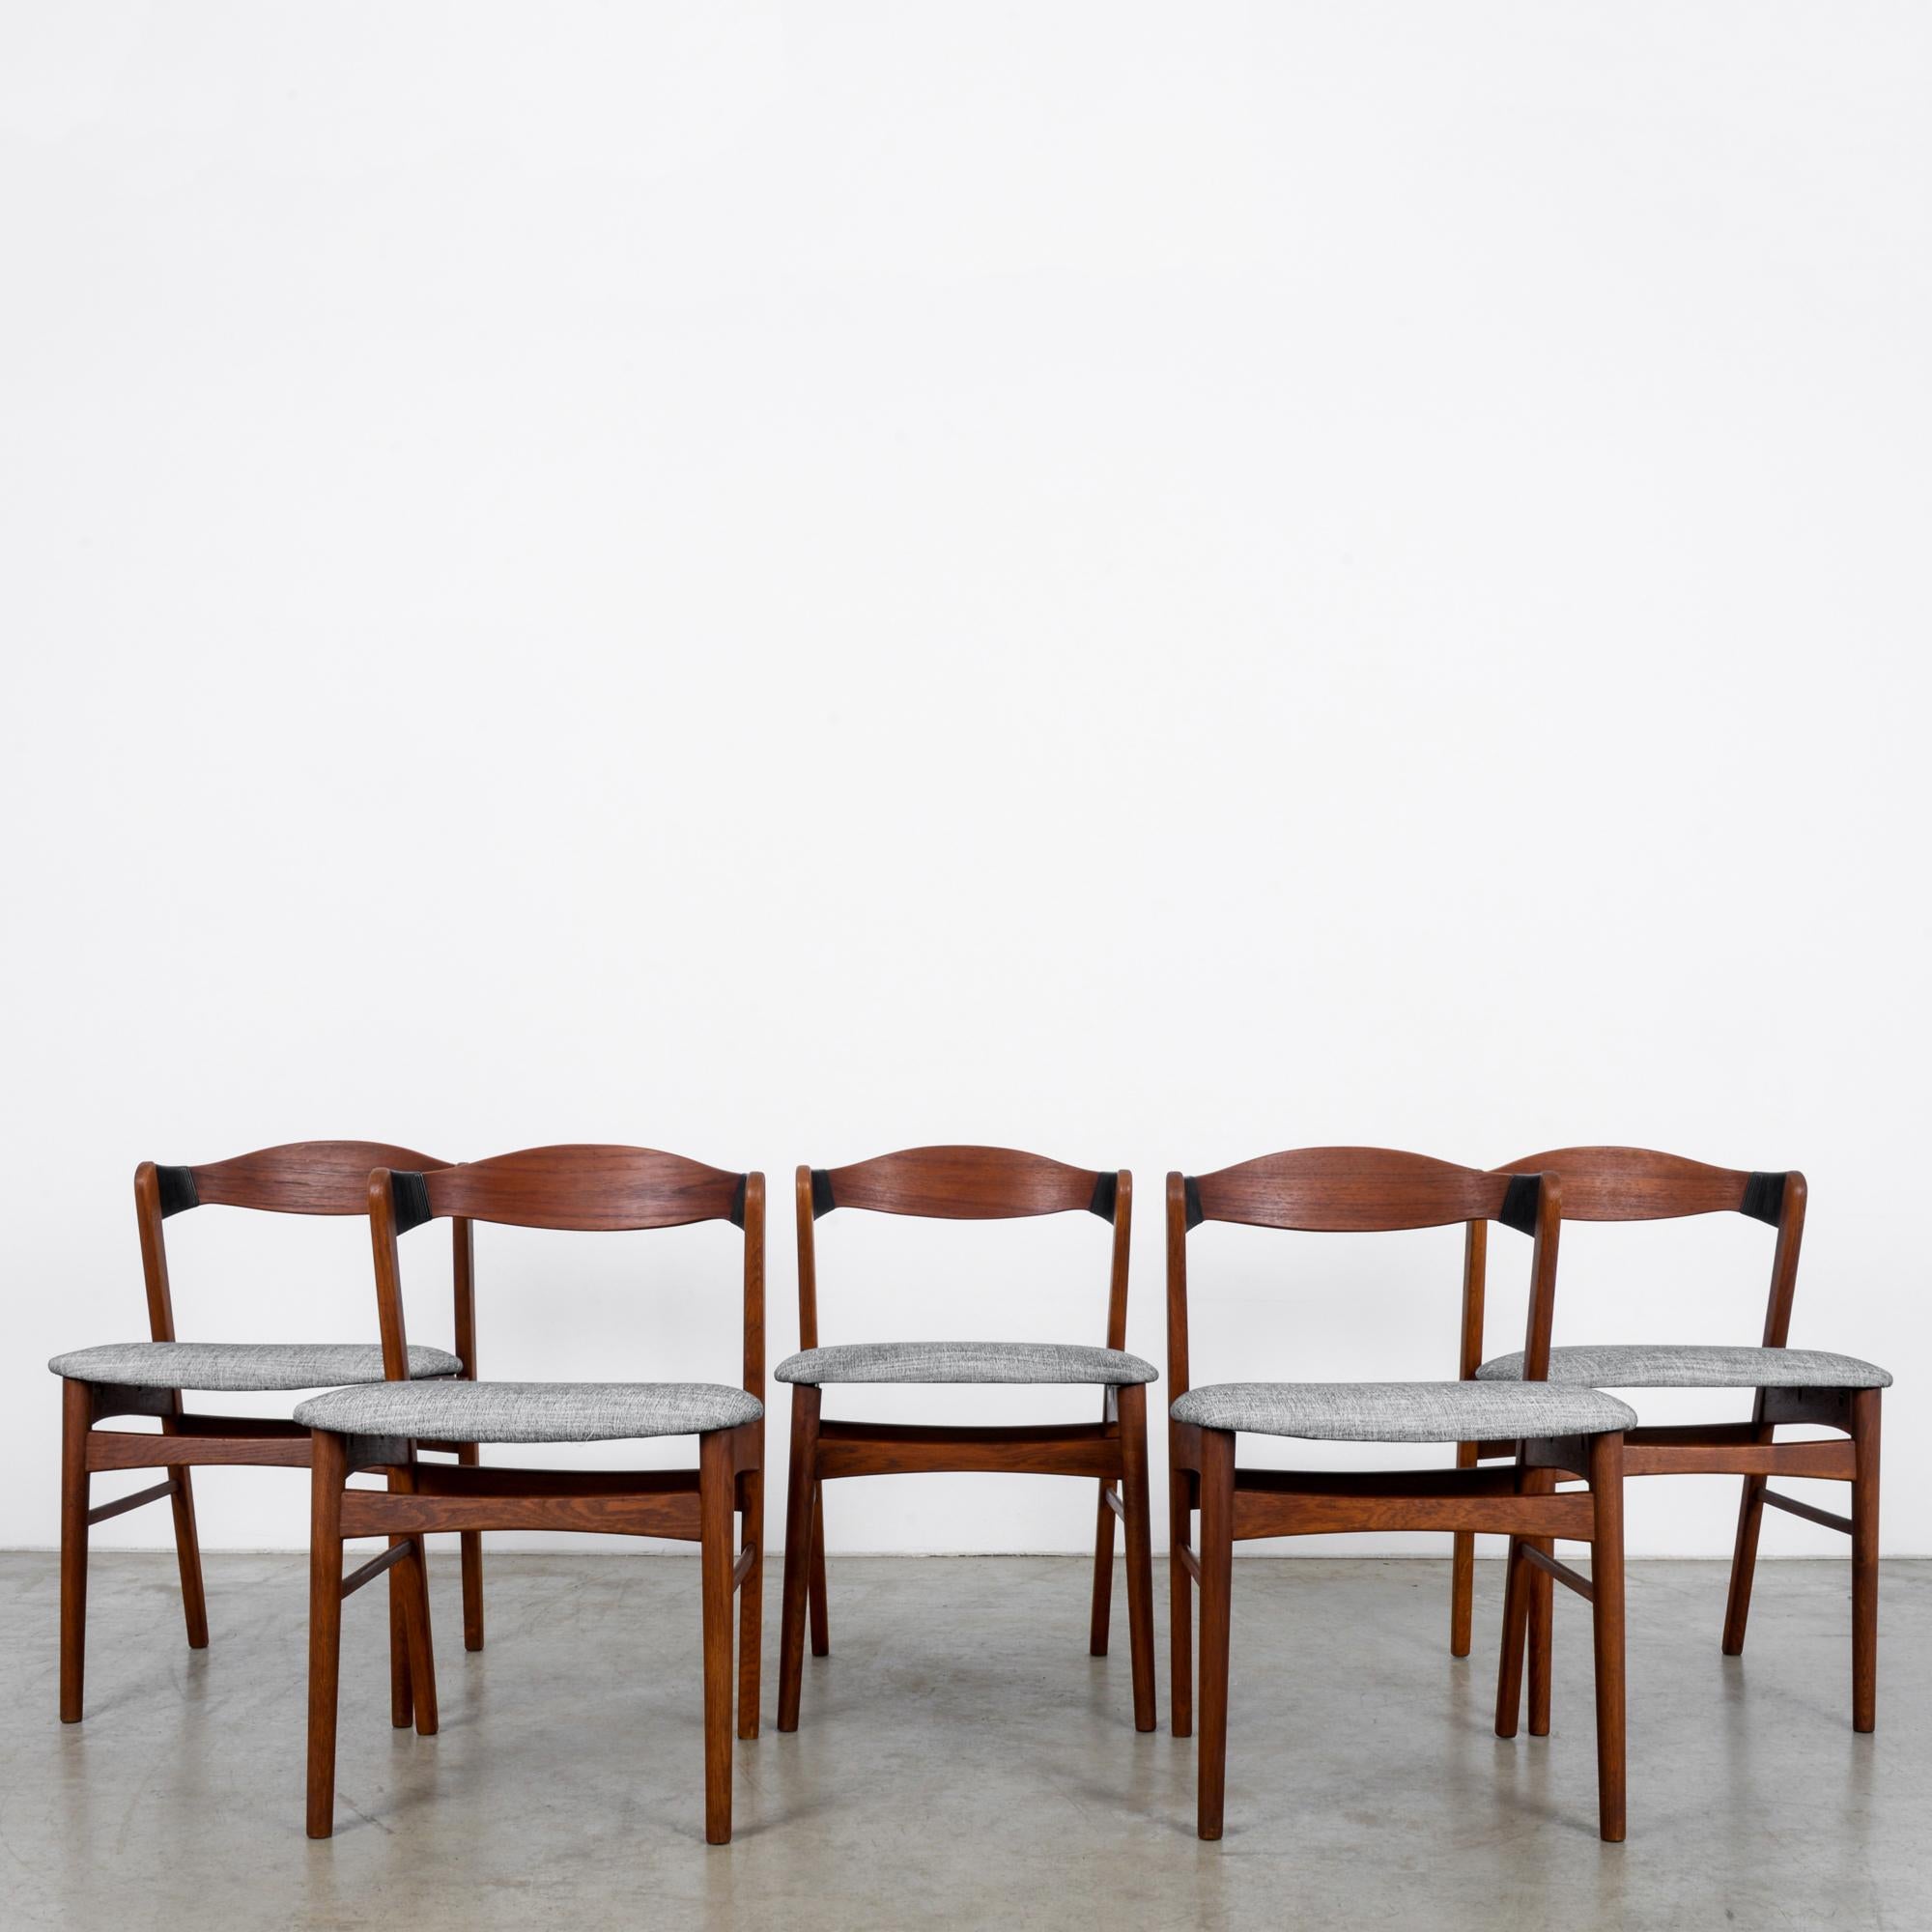 Late 20th Century 1960s Danish Teak Chairs with Upholstered Seats, Set of Five